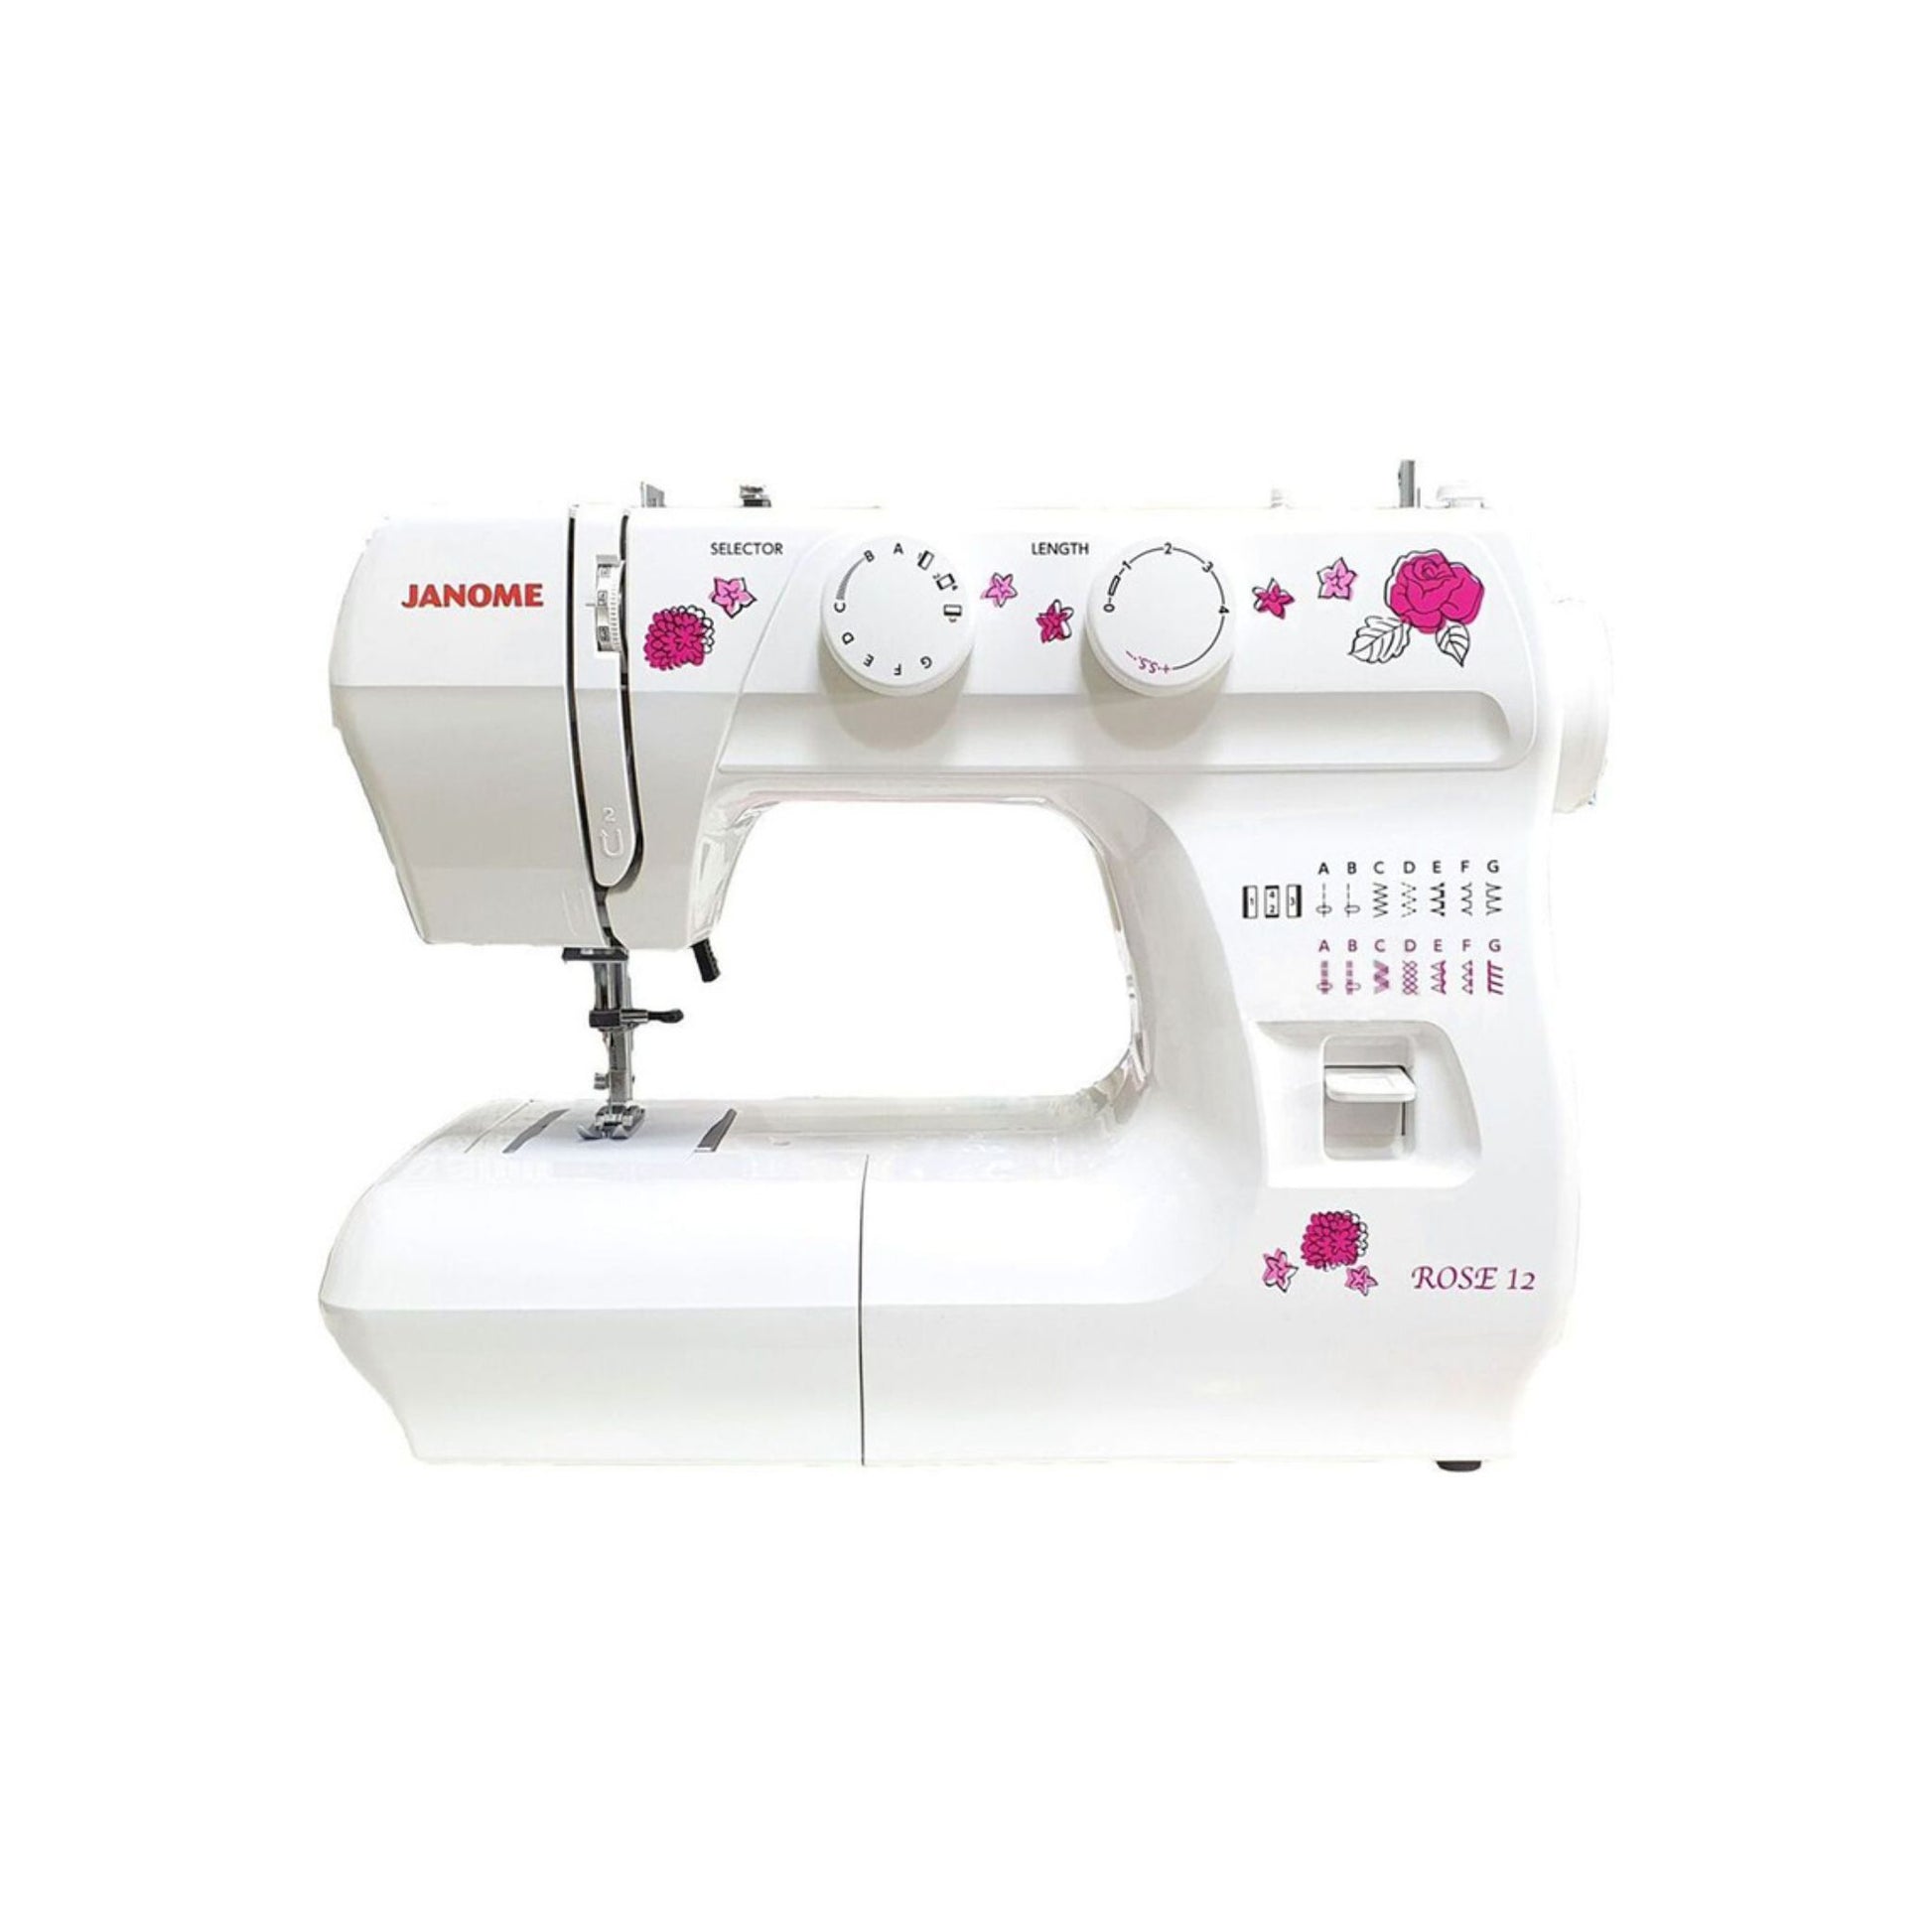 Janome rose 12LE portable -Sewing machine - White - Front view